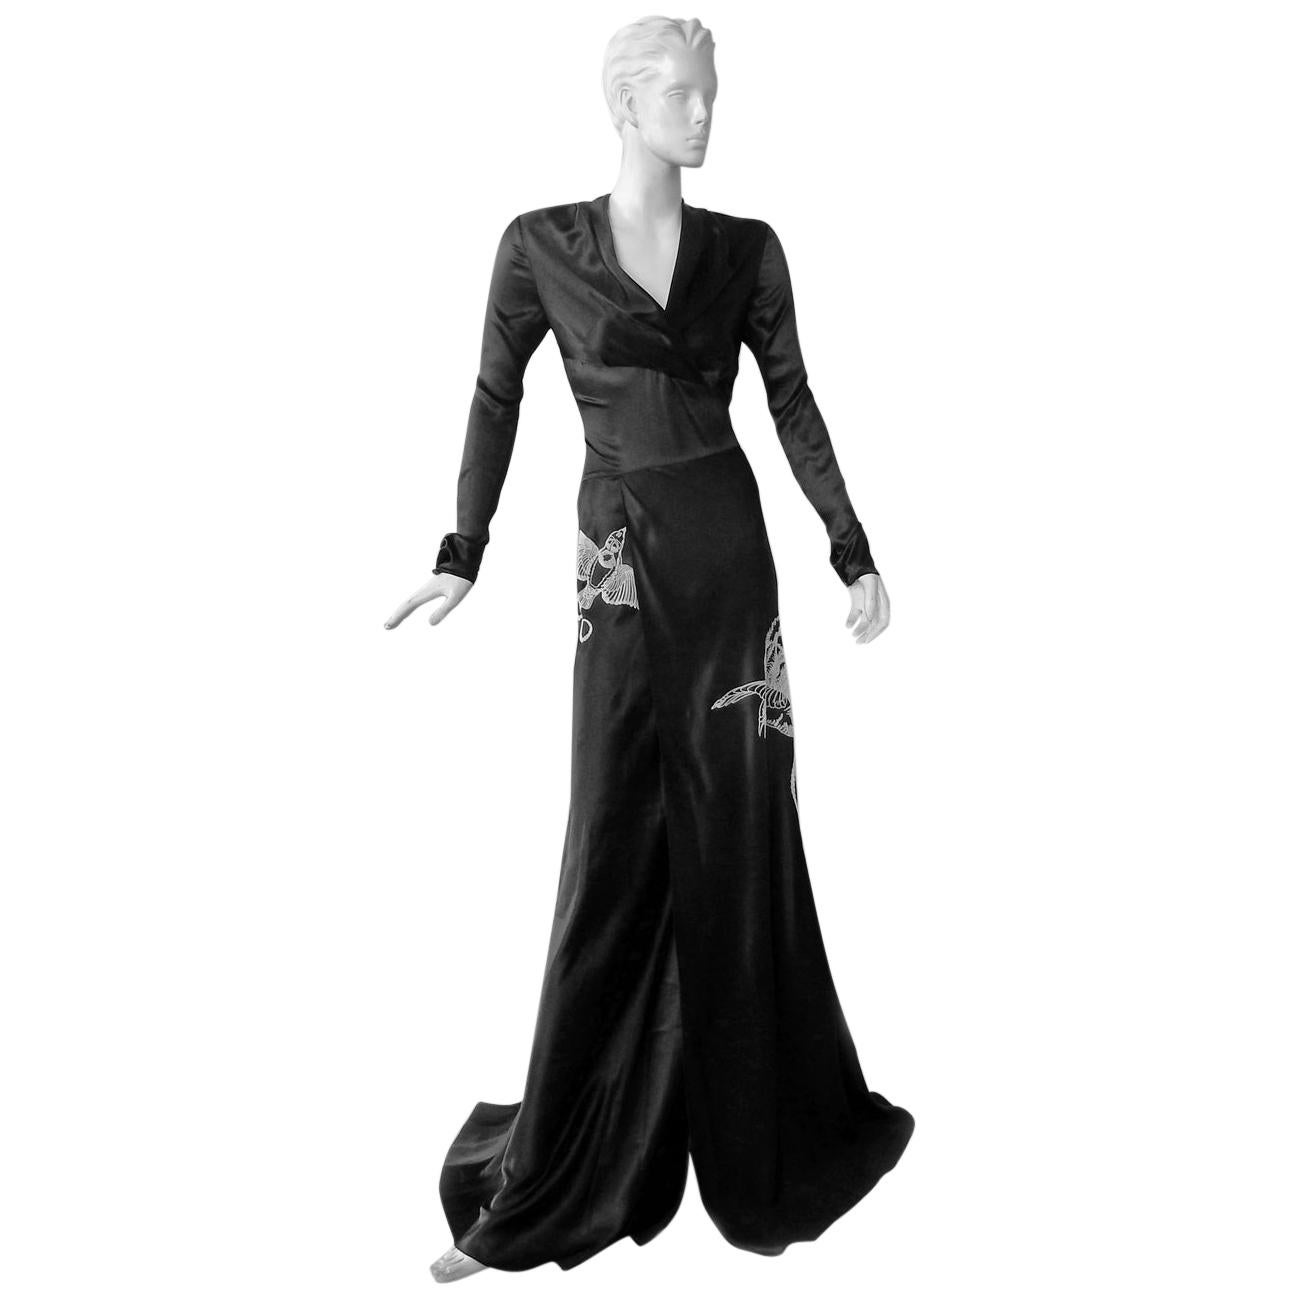 NWT Vionnet Runway Deco Inspired Sultry Black Dress Gown For Sale